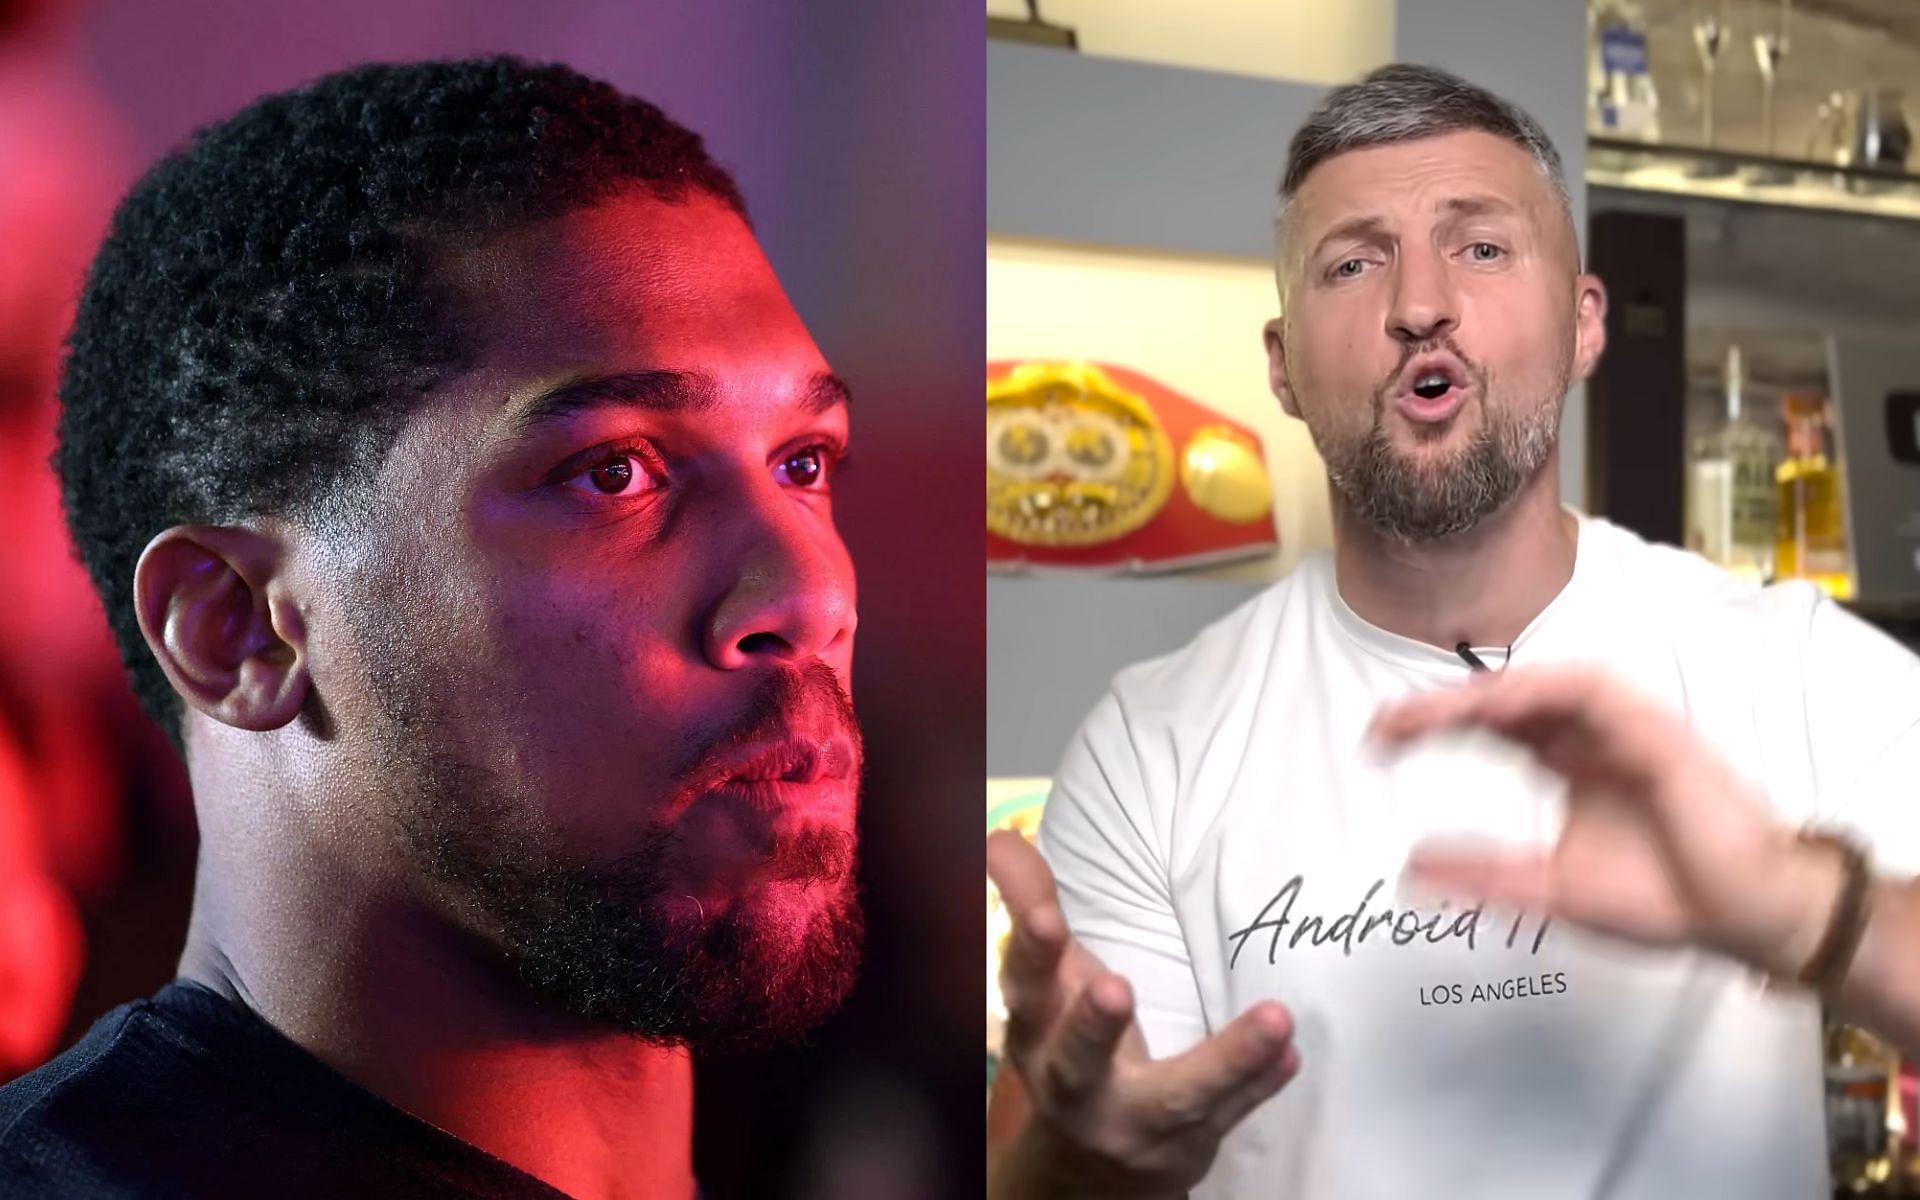 Carl Froch (right) takes aim at Anthony Joshua (left) after heated exchange on WhatsApp [Images courtesy: Getty Images and @frochonfighting on YouTube]